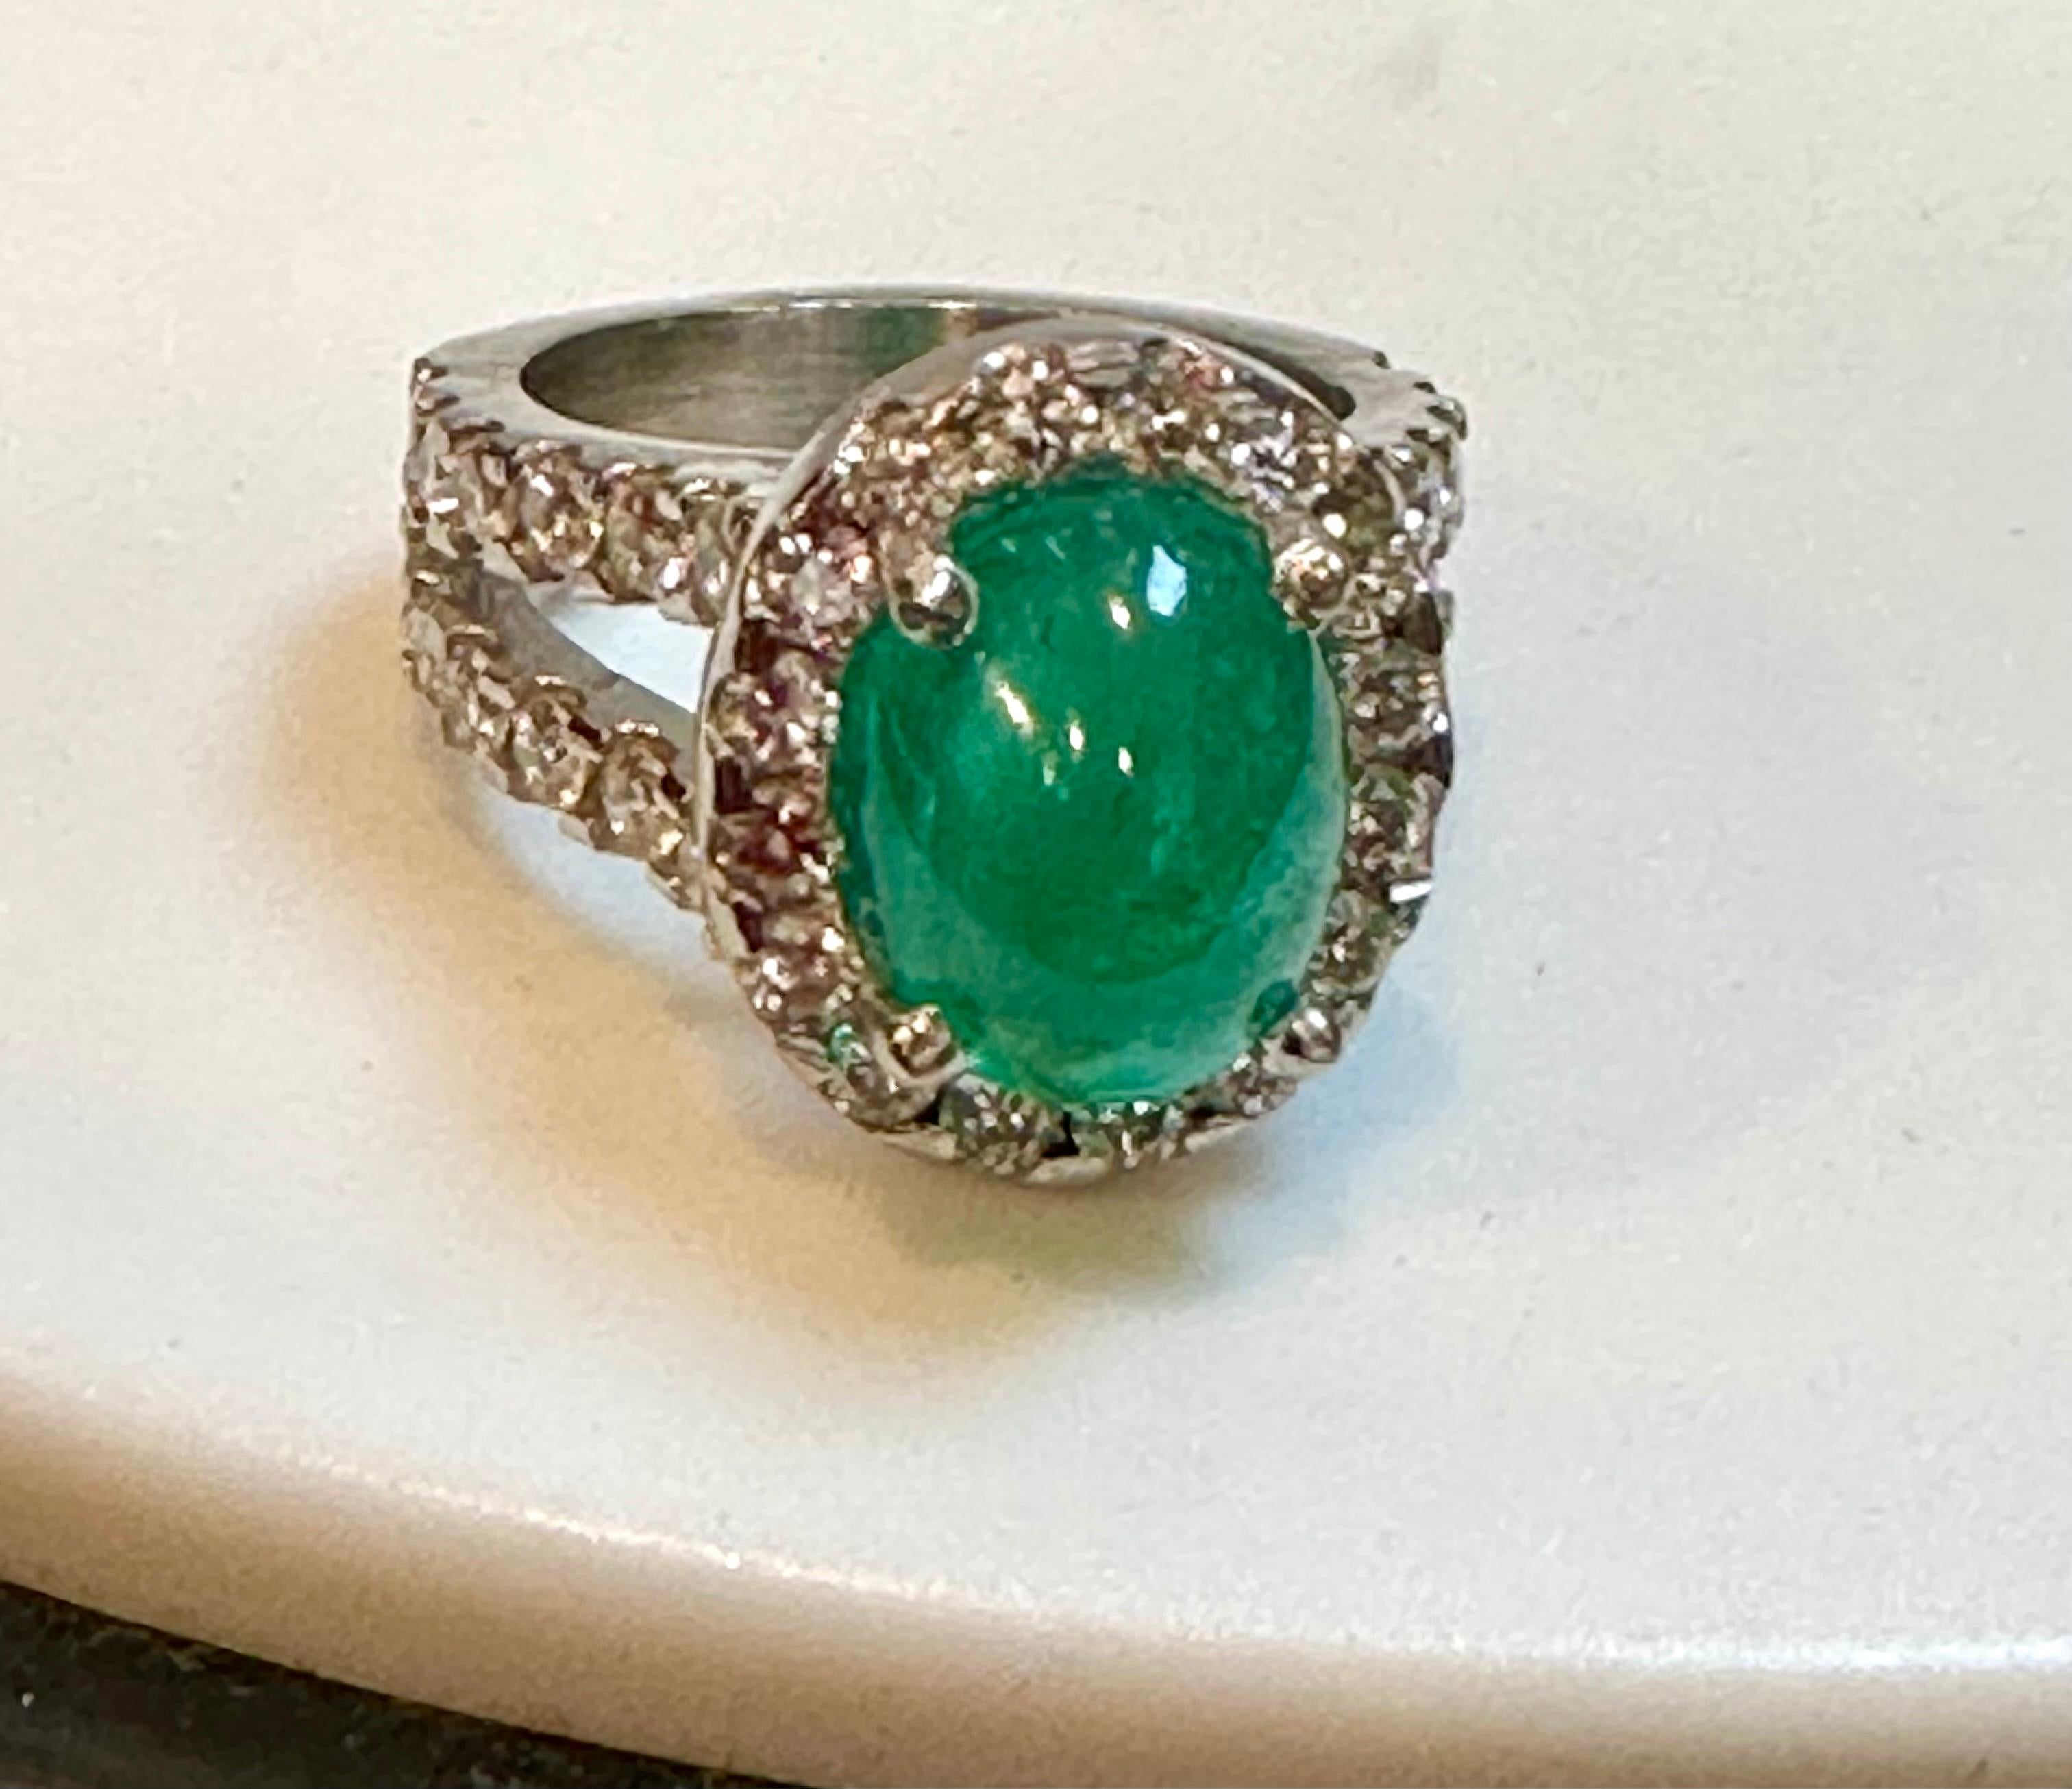 5 Carat Zambian Emerald Cabochon & Diamond Cocktail Ring 18 Karat White Gold In Excellent Condition For Sale In New York, NY